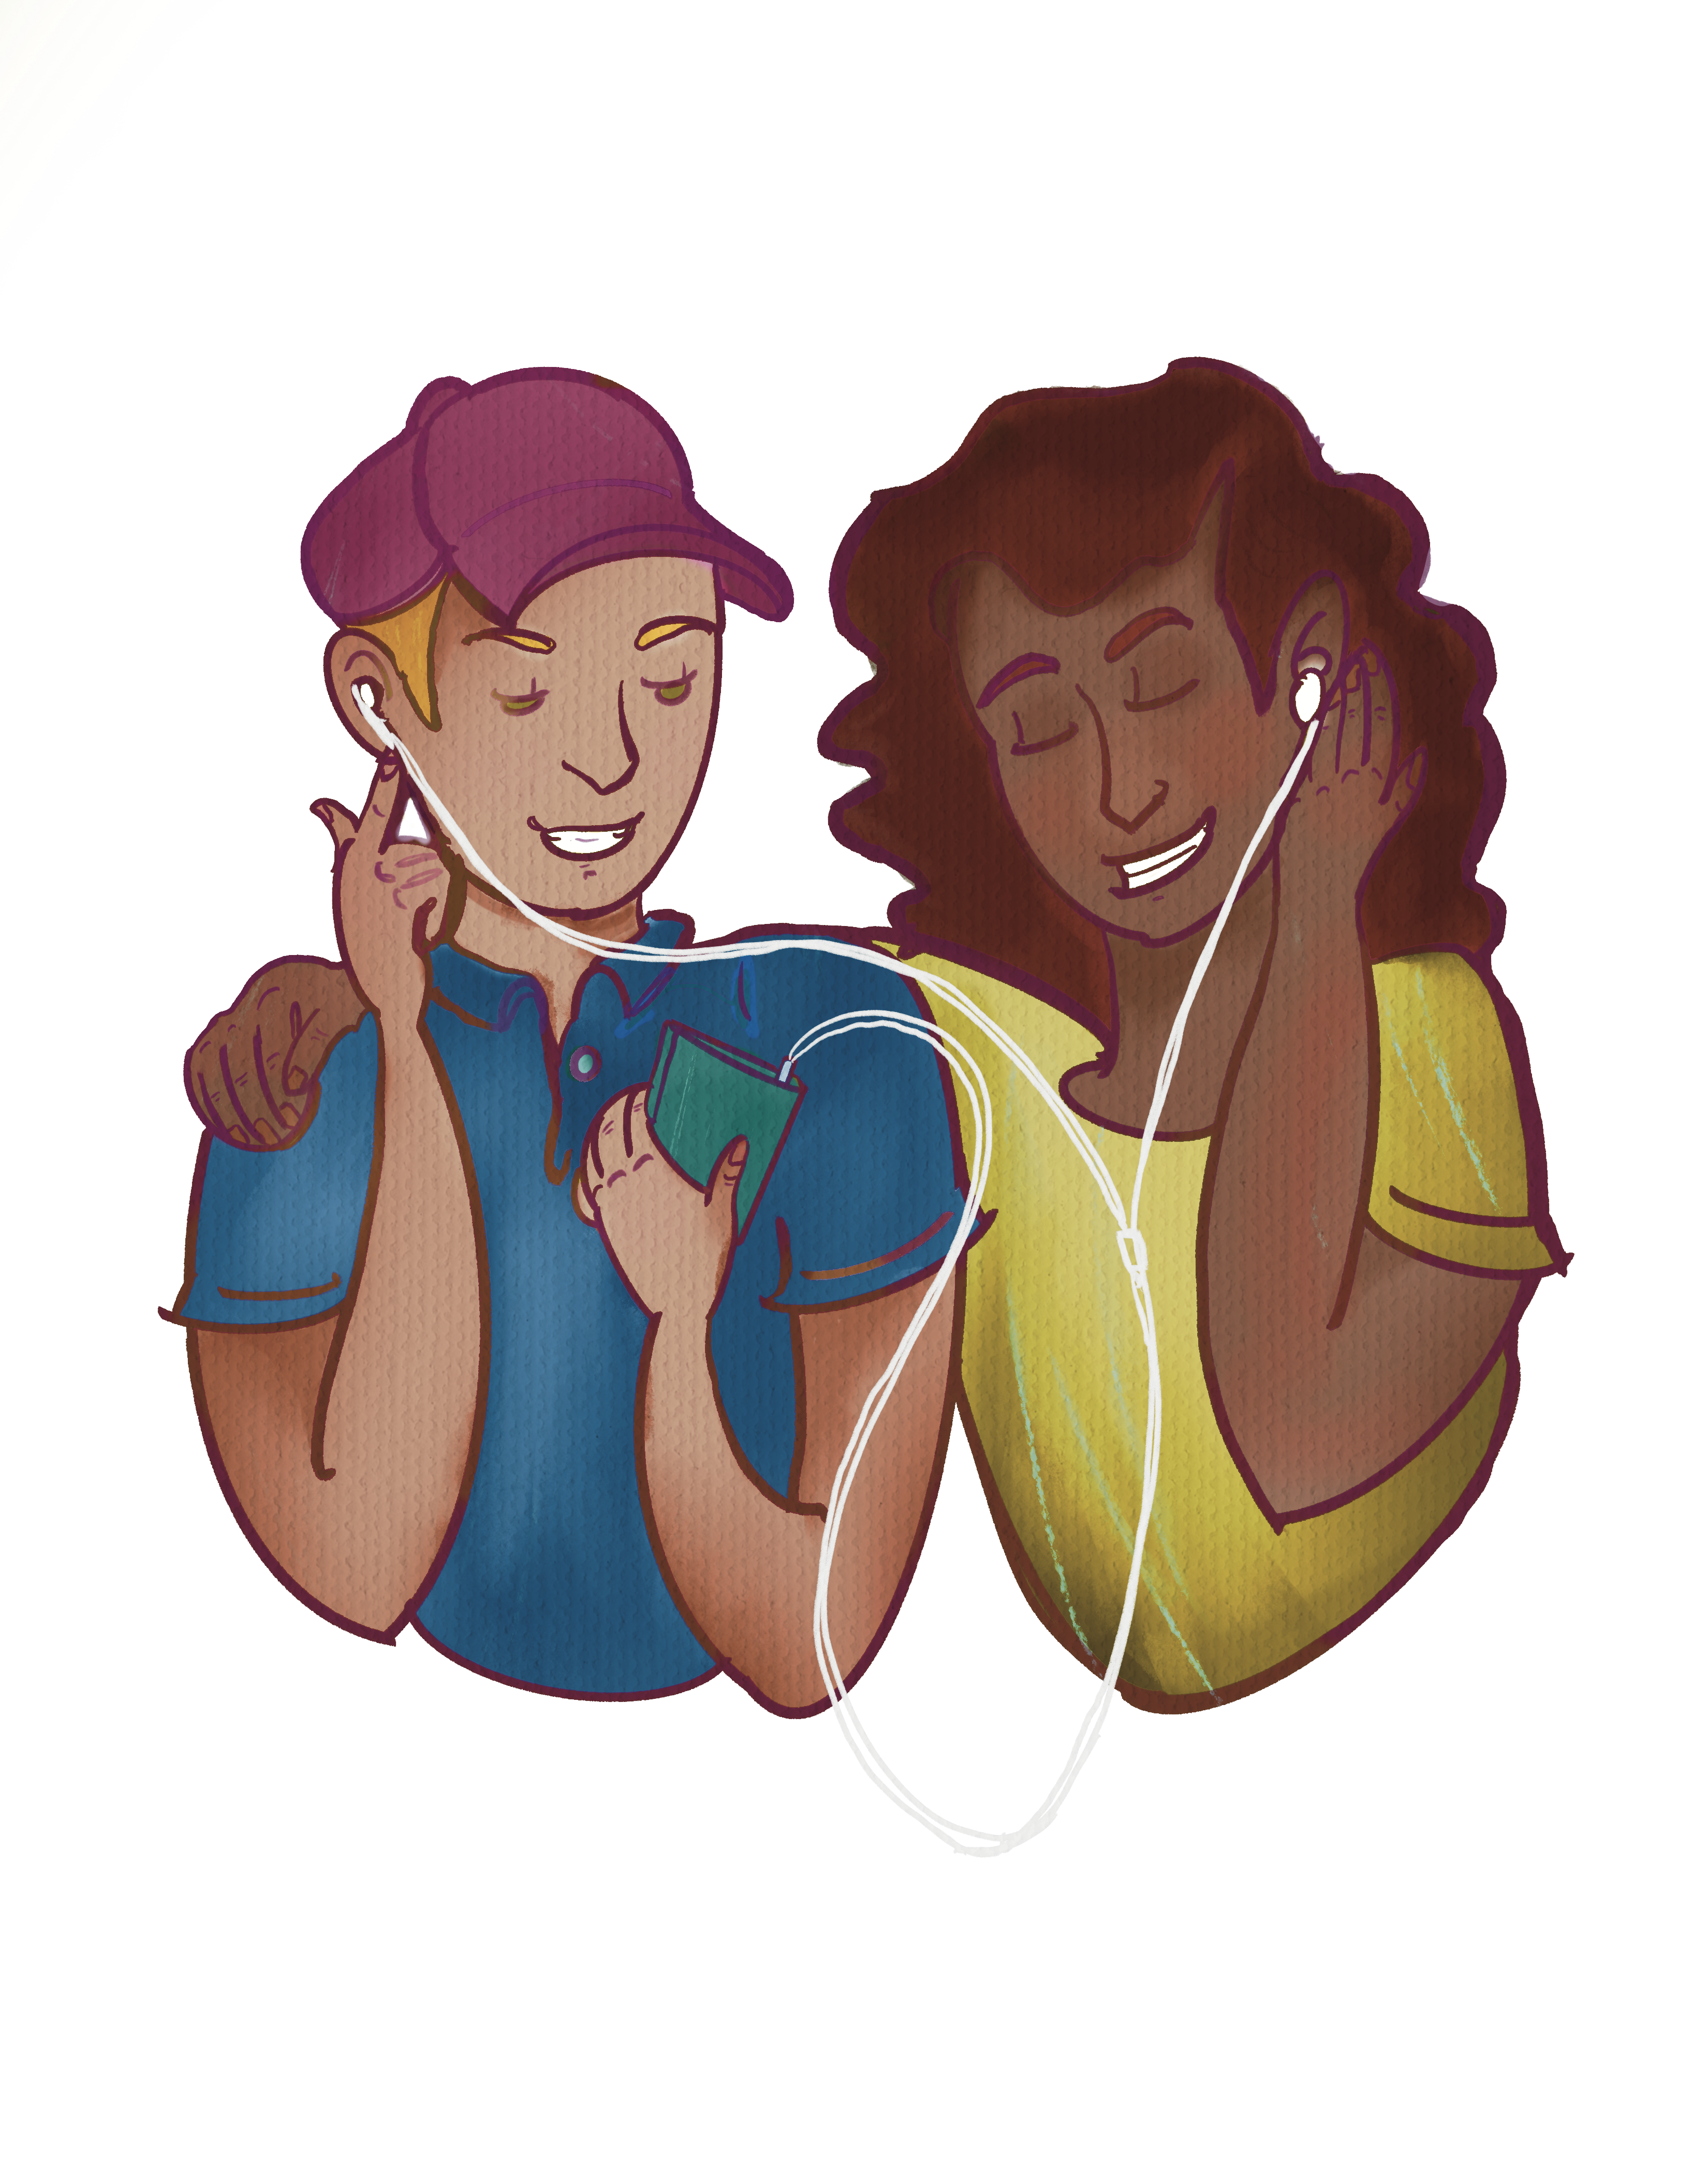 Two people sharing earbuds to listen to a book